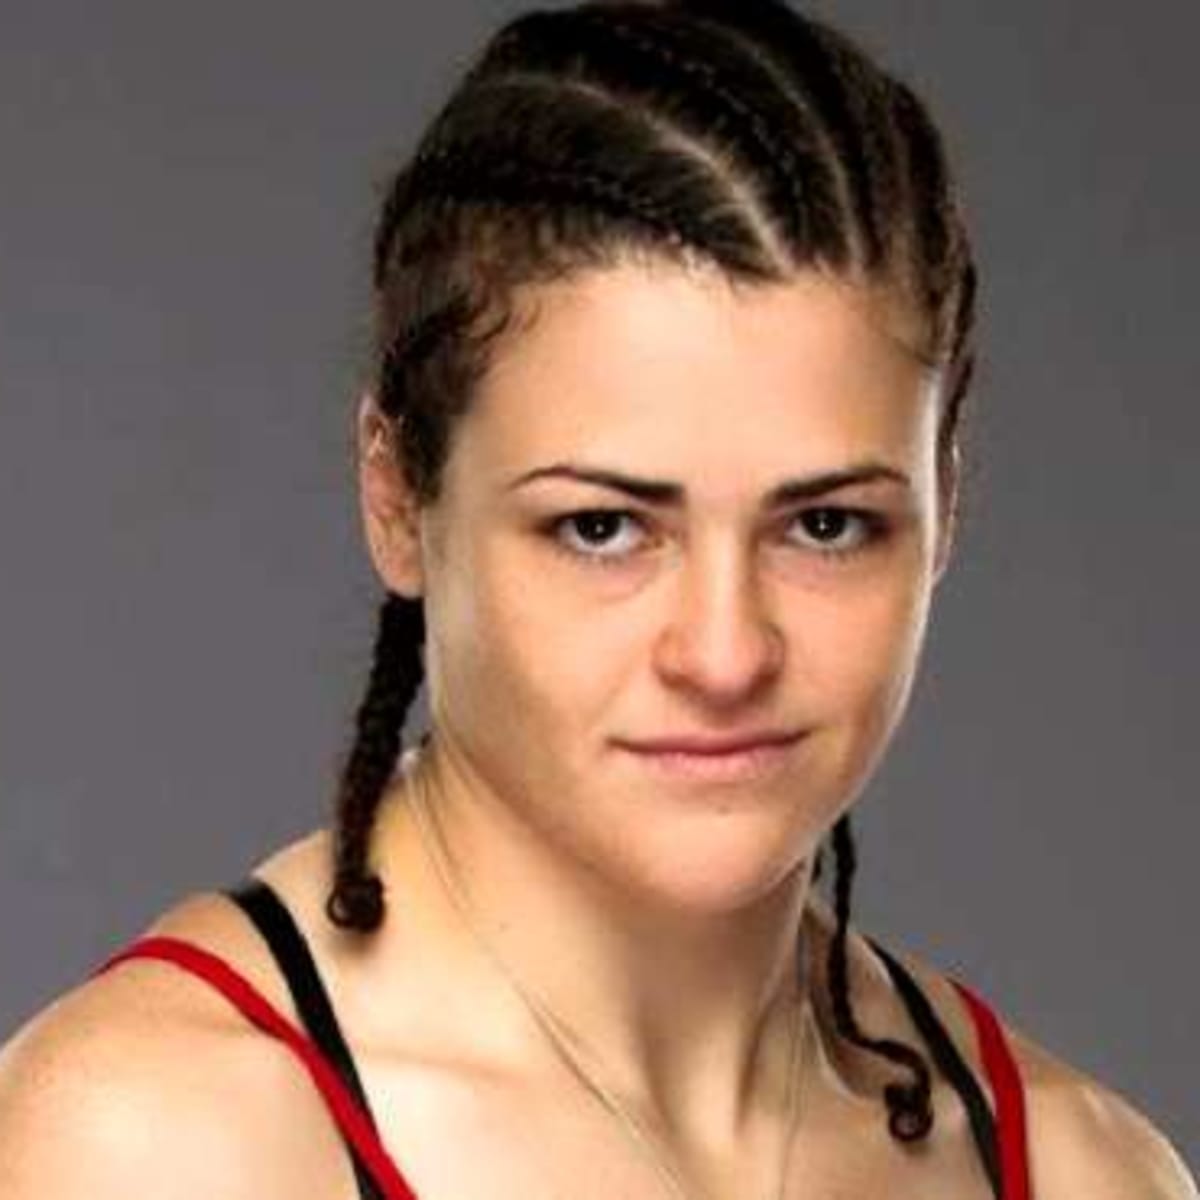 Following recent victory, Amanda Bell aiming for Bellator title shot in